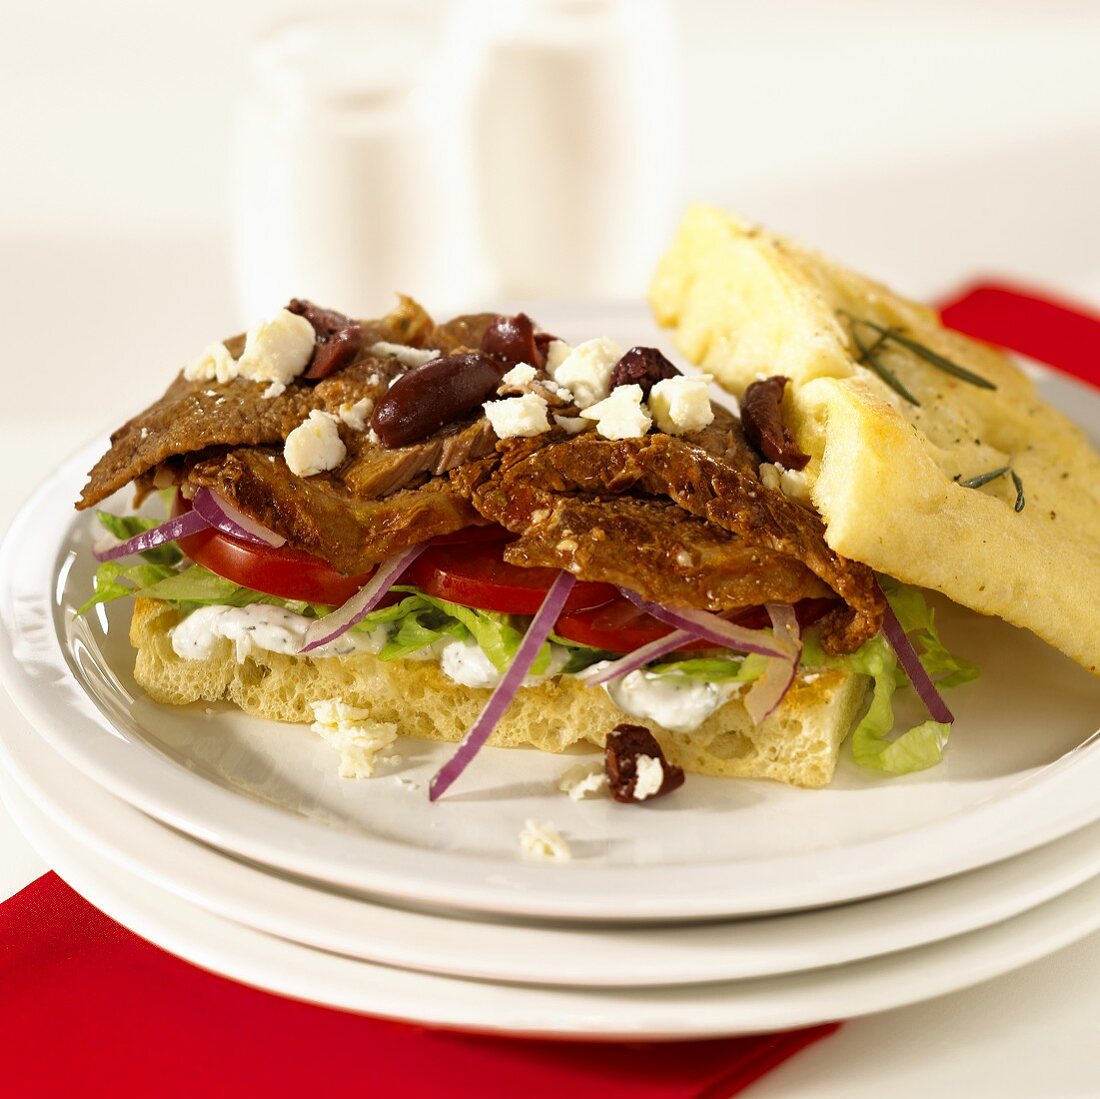 Pita bread with beef, feta and olives